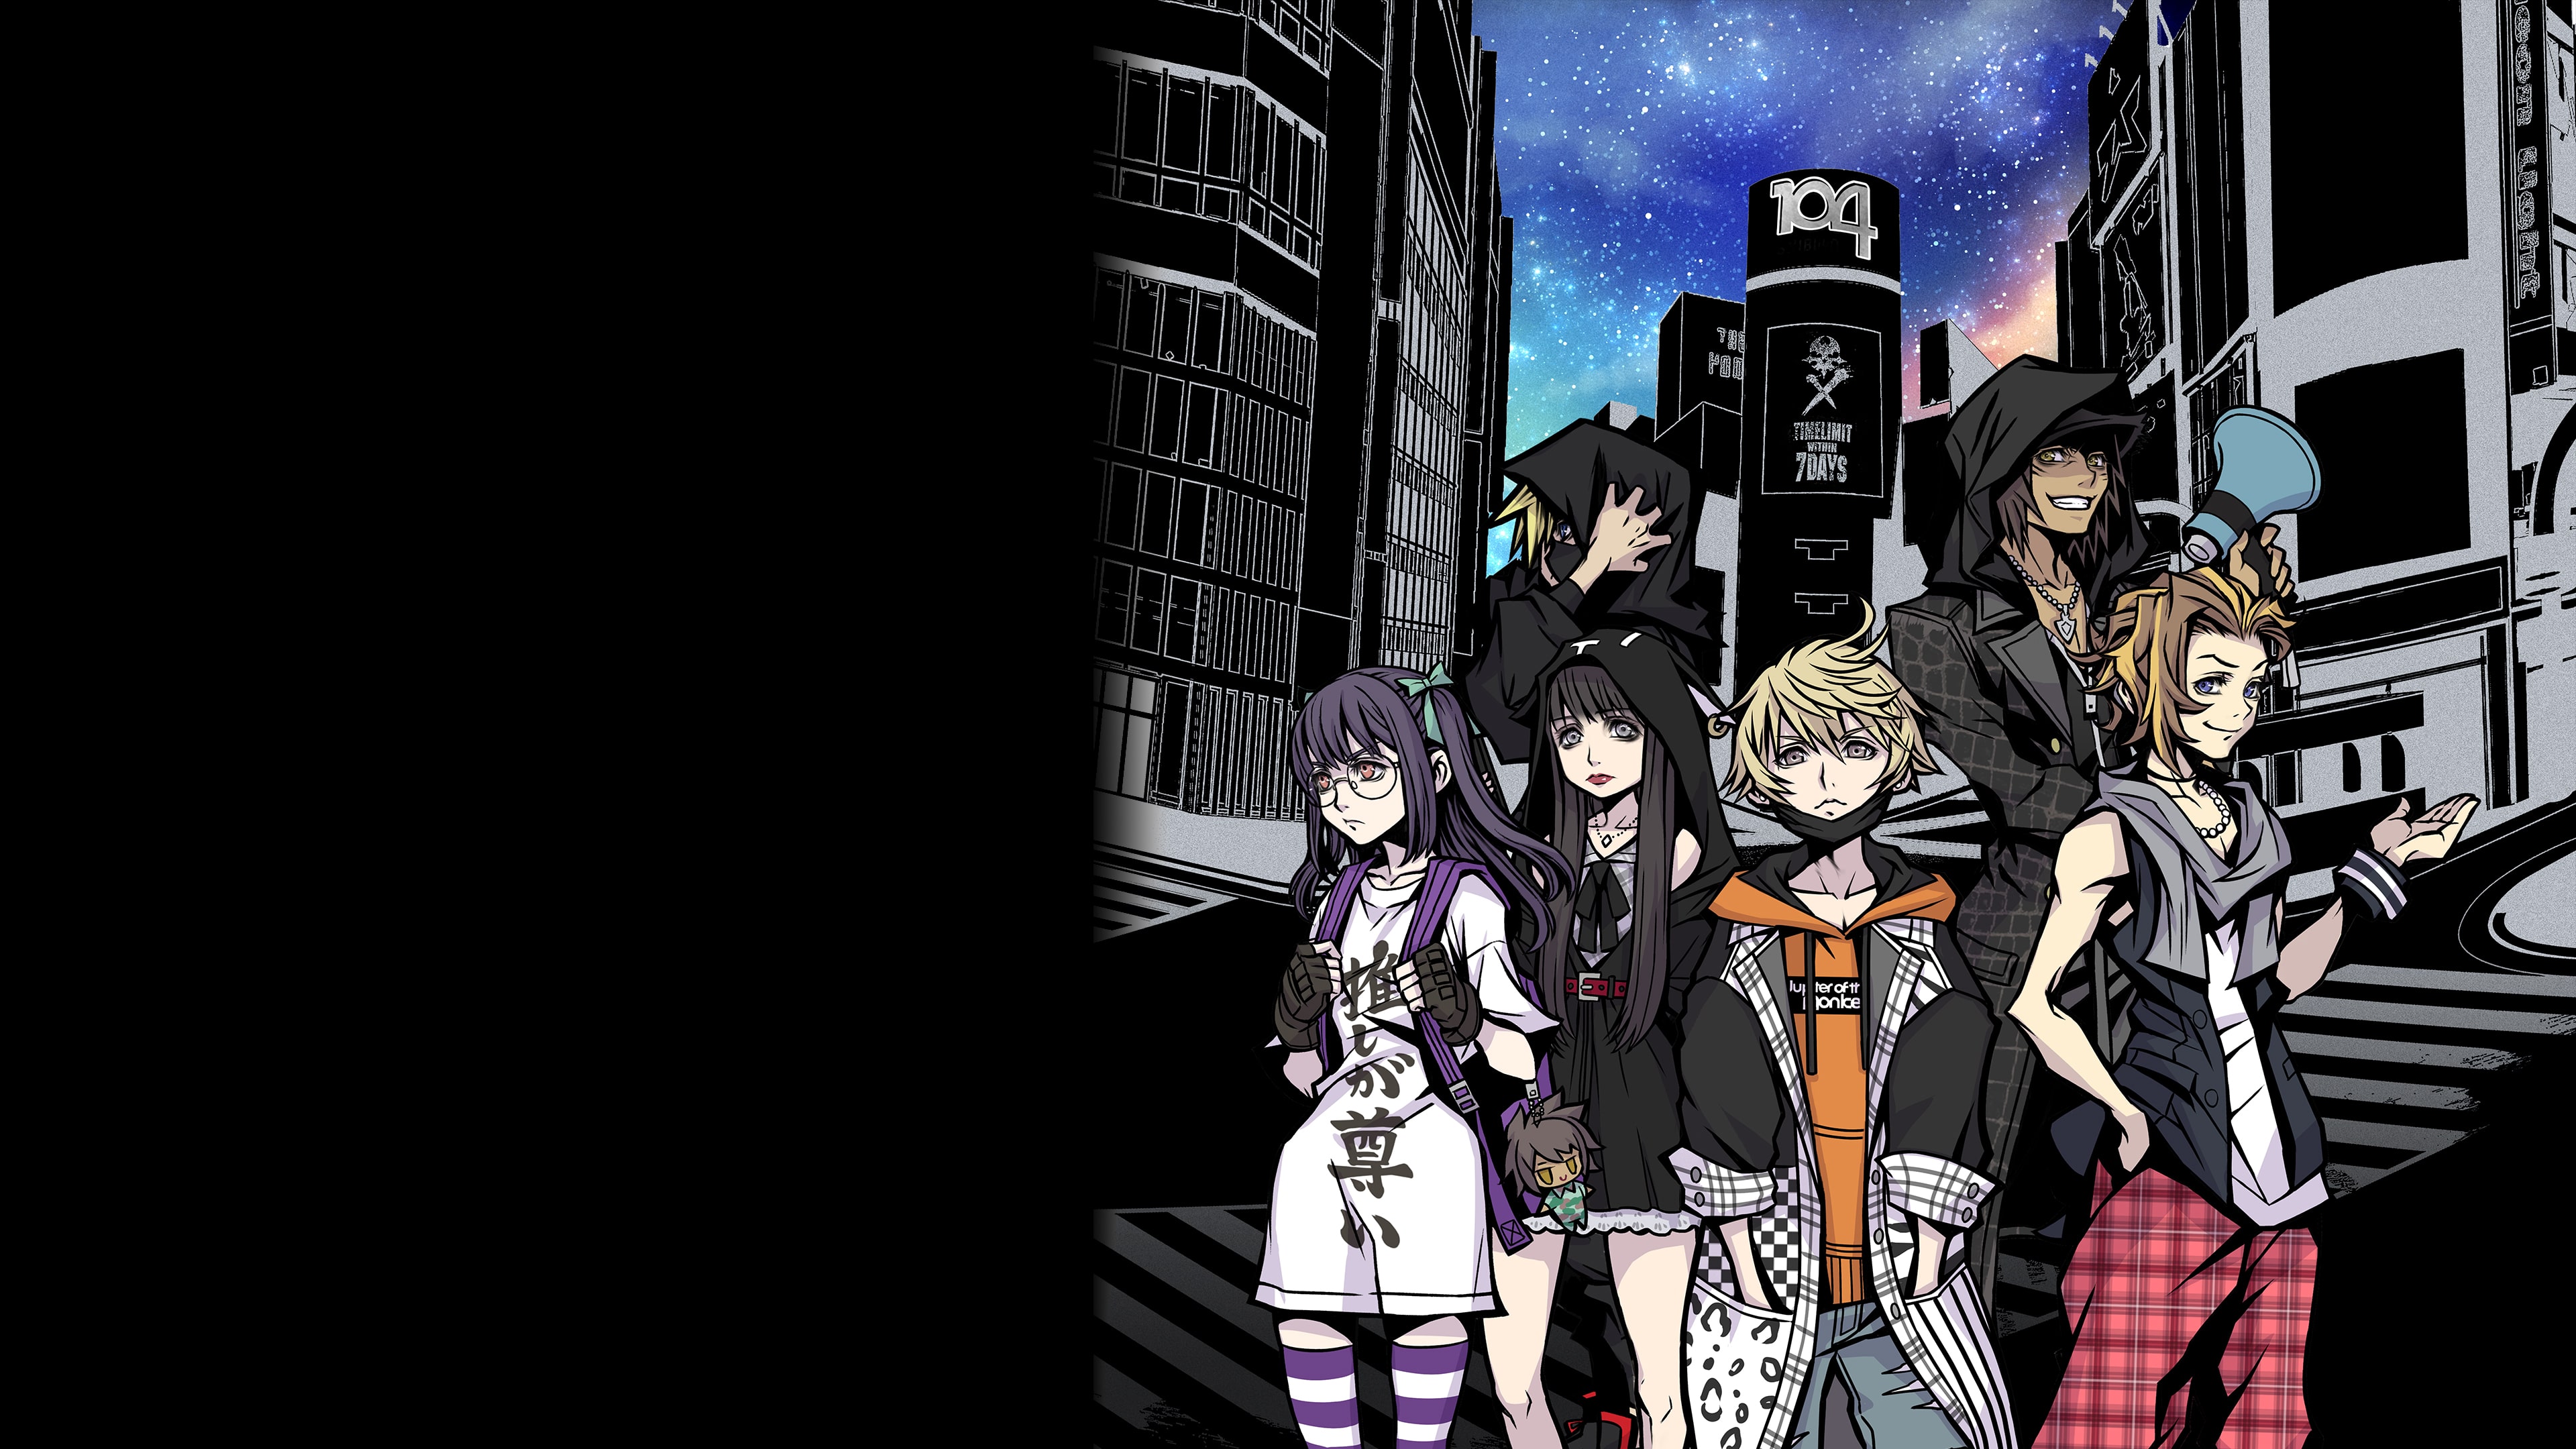 NEO: The World Ends with You (English, Japanese)